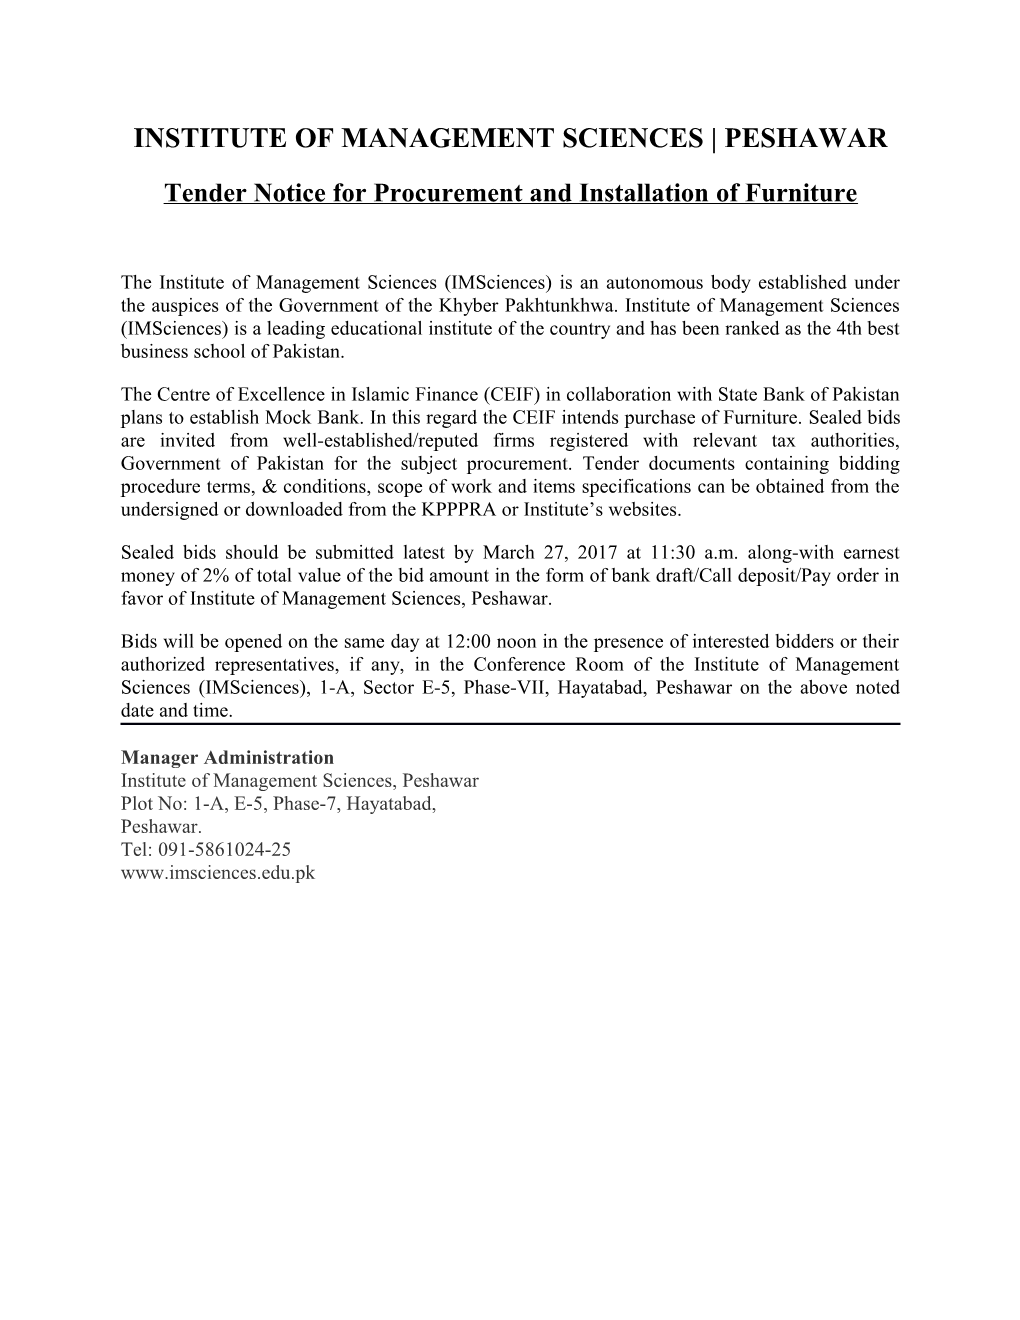 Tender Notice for Procurement and Installation of Furniture